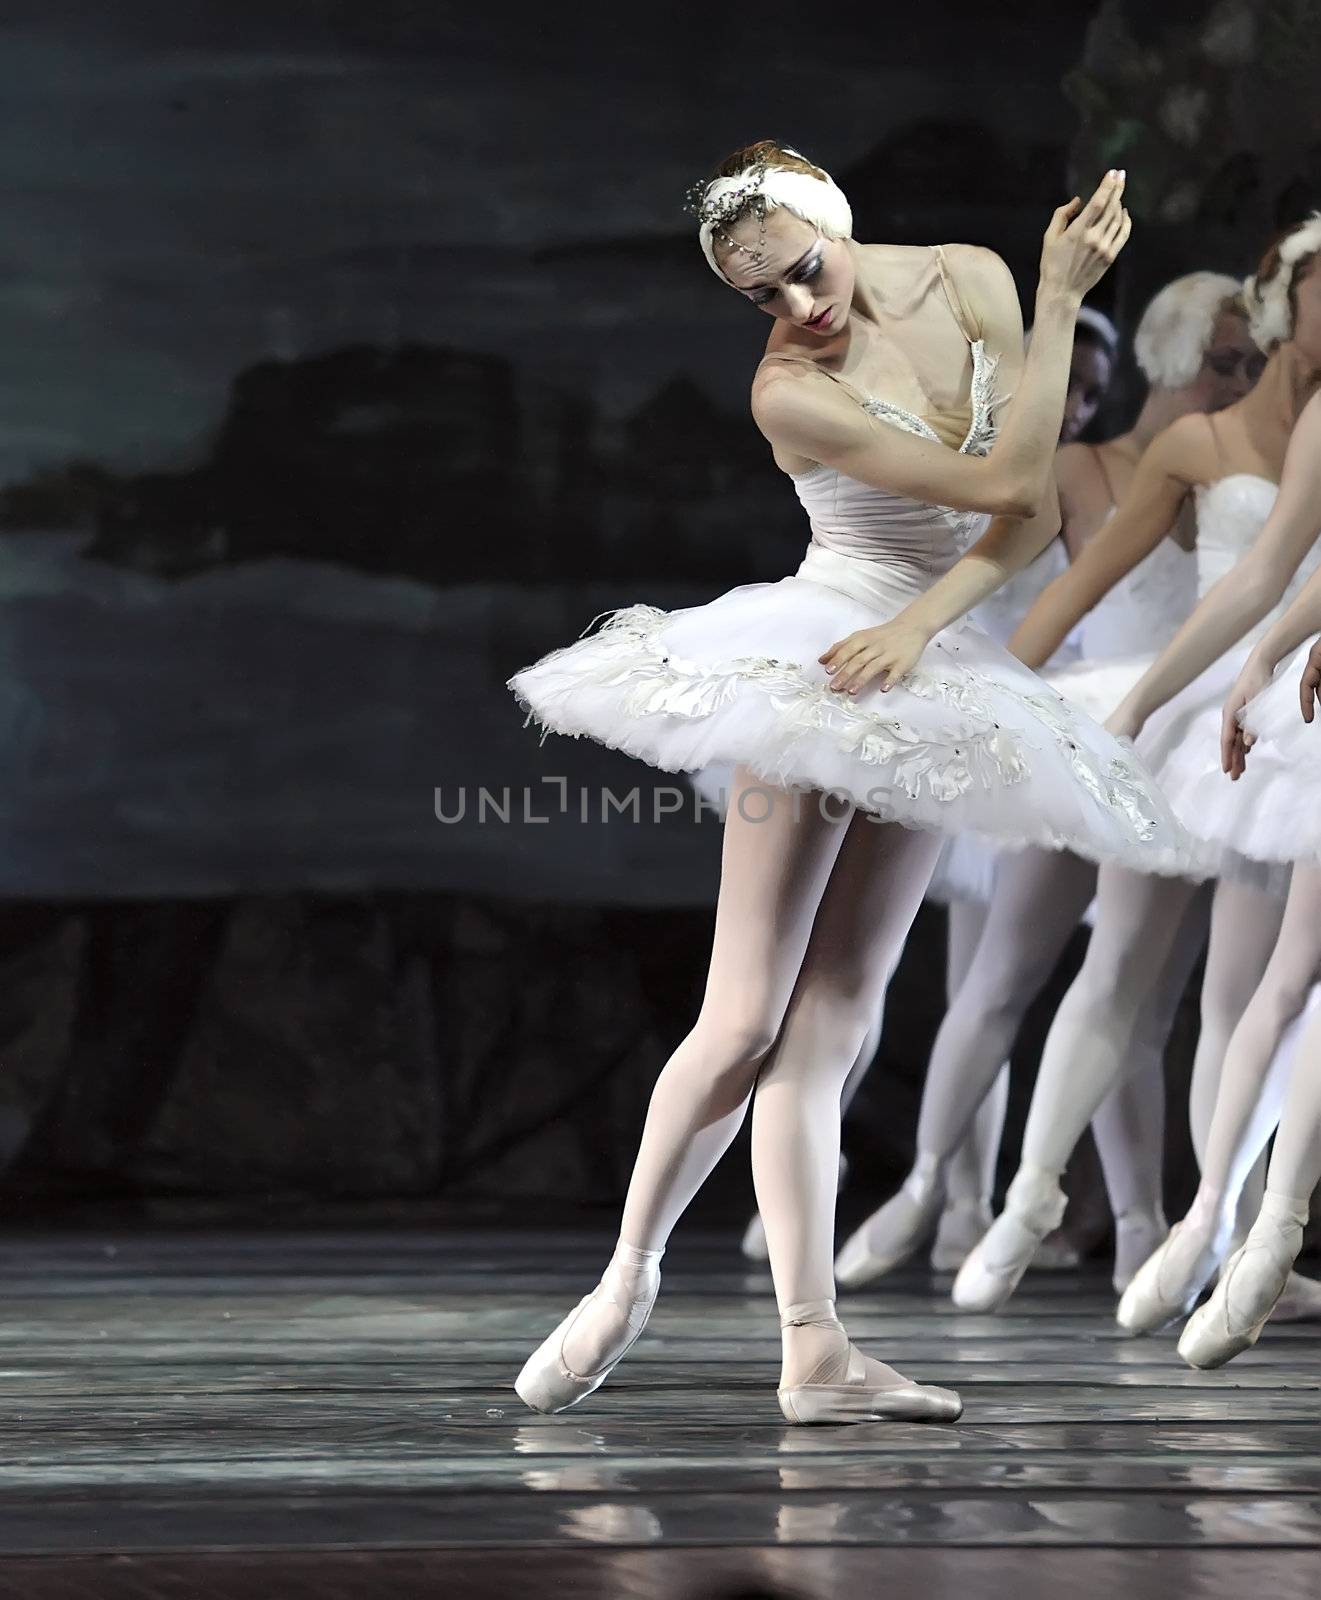 swan lake ballet performed by russian royal ballet by jackq